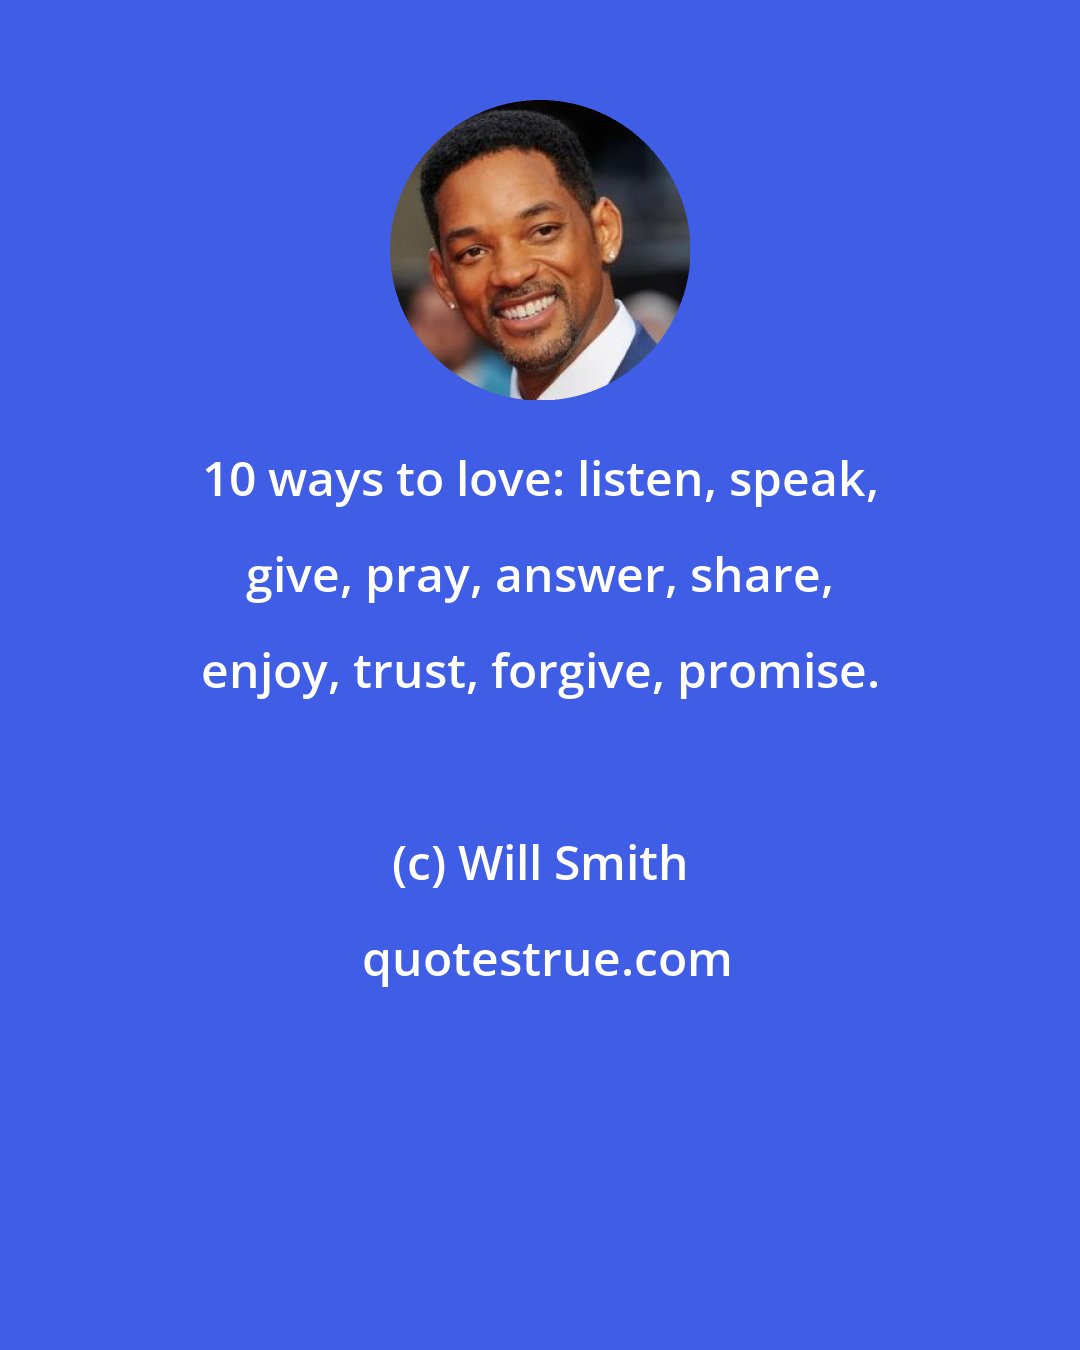 Will Smith: 10 ways to love: listen, speak, give, pray, answer, share, enjoy, trust, forgive, promise.